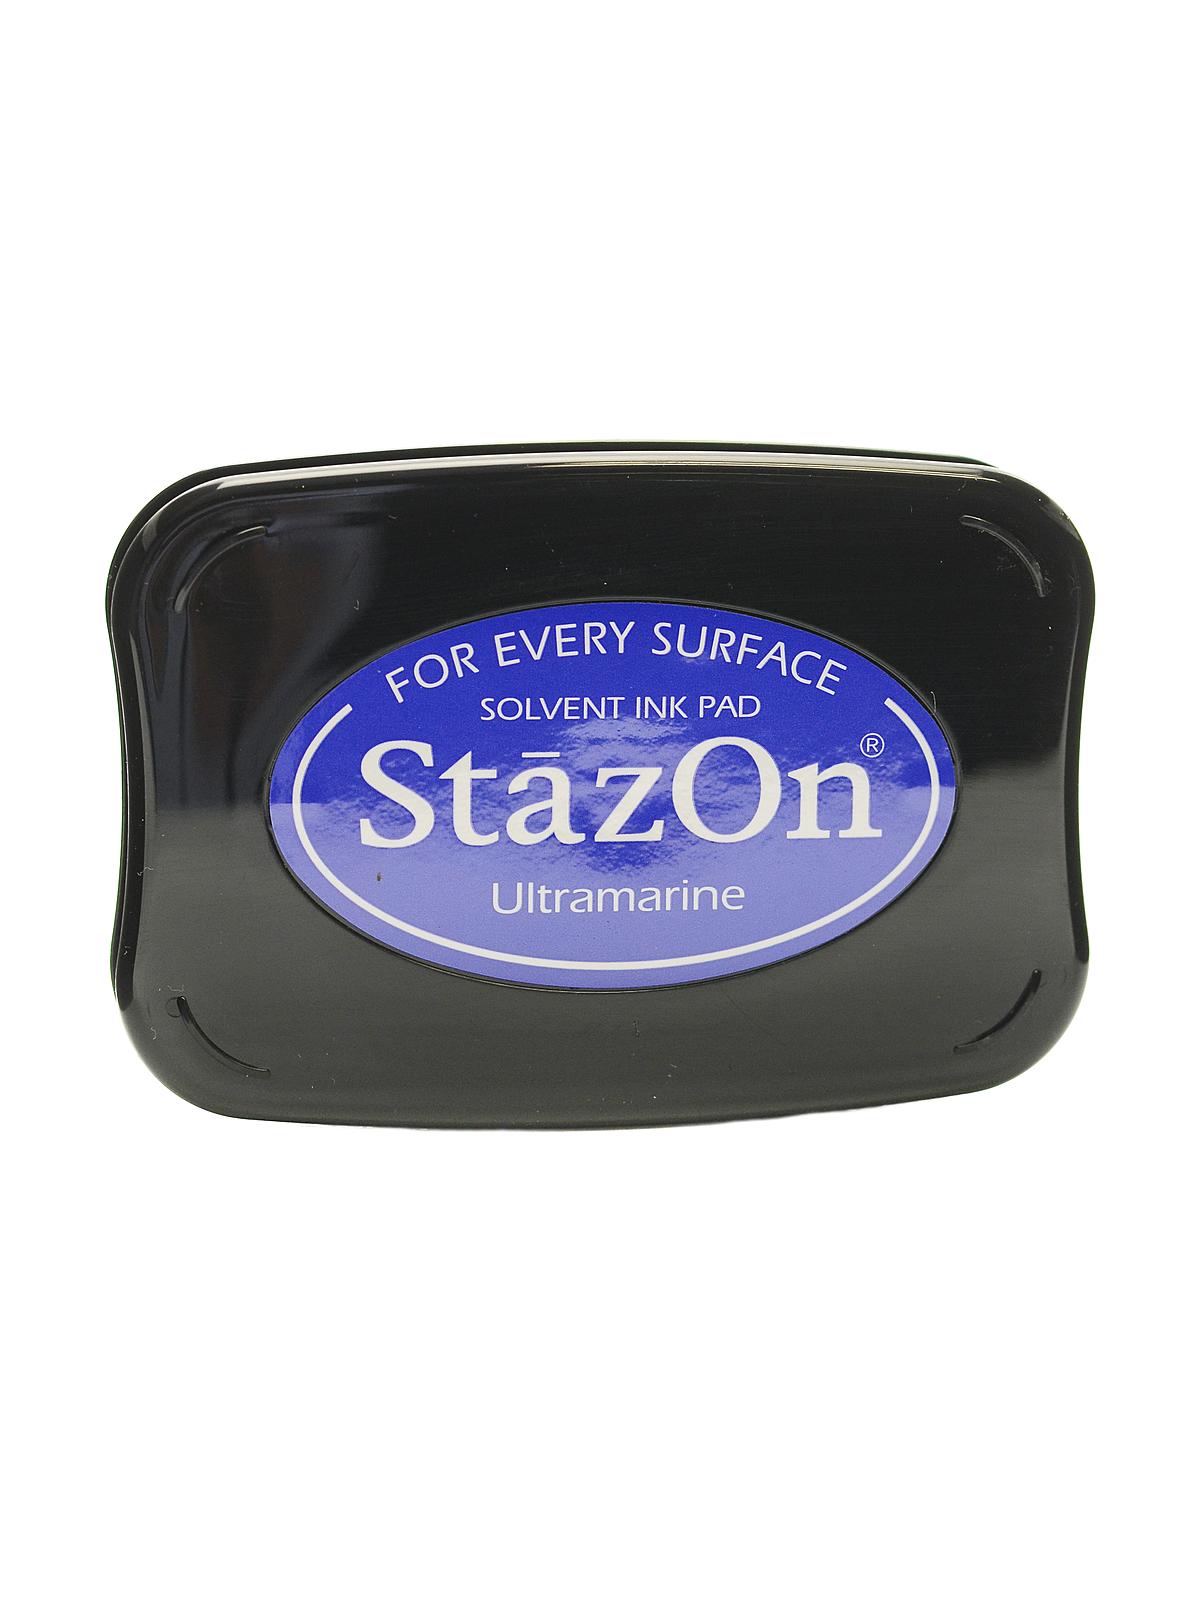 Stazon Solvent Ink Ultramarine 3.75 In. X 2.625 In. Full-size Pad